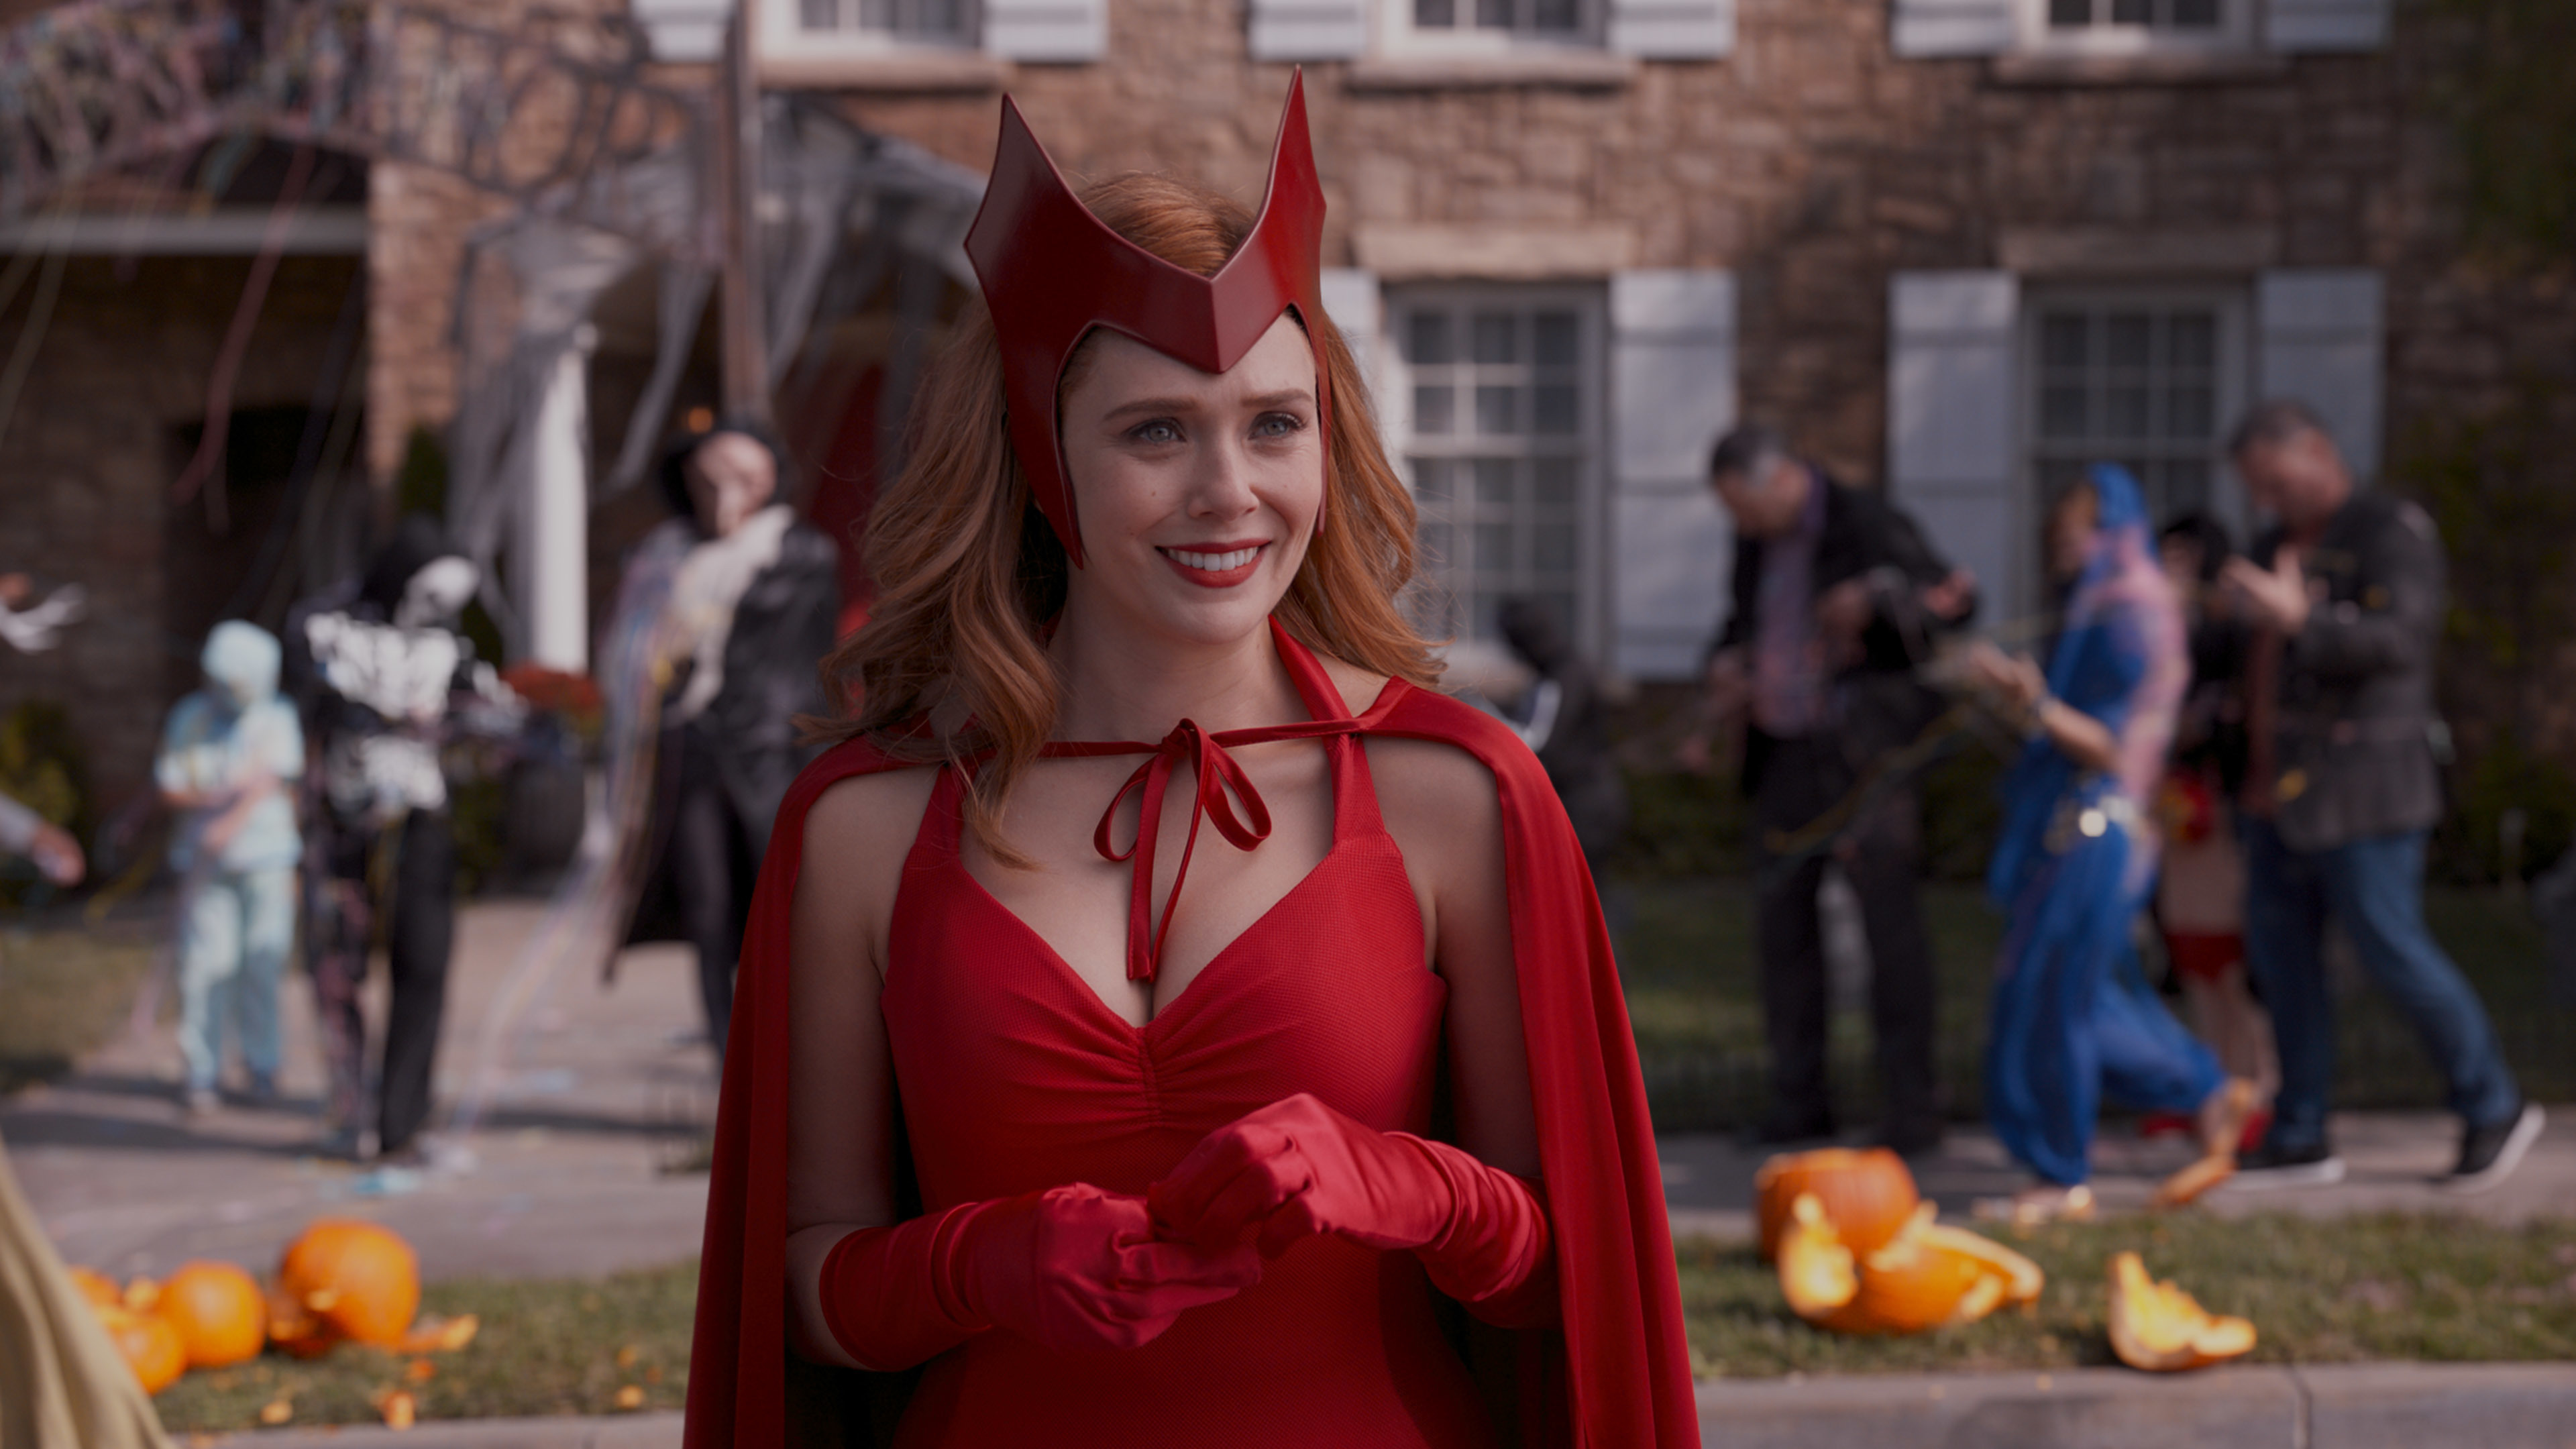 Wanda Maximoff 2021 Red Costume, HD Tv Shows, 4k Wallpaper, Image, Background, Photo and Picture